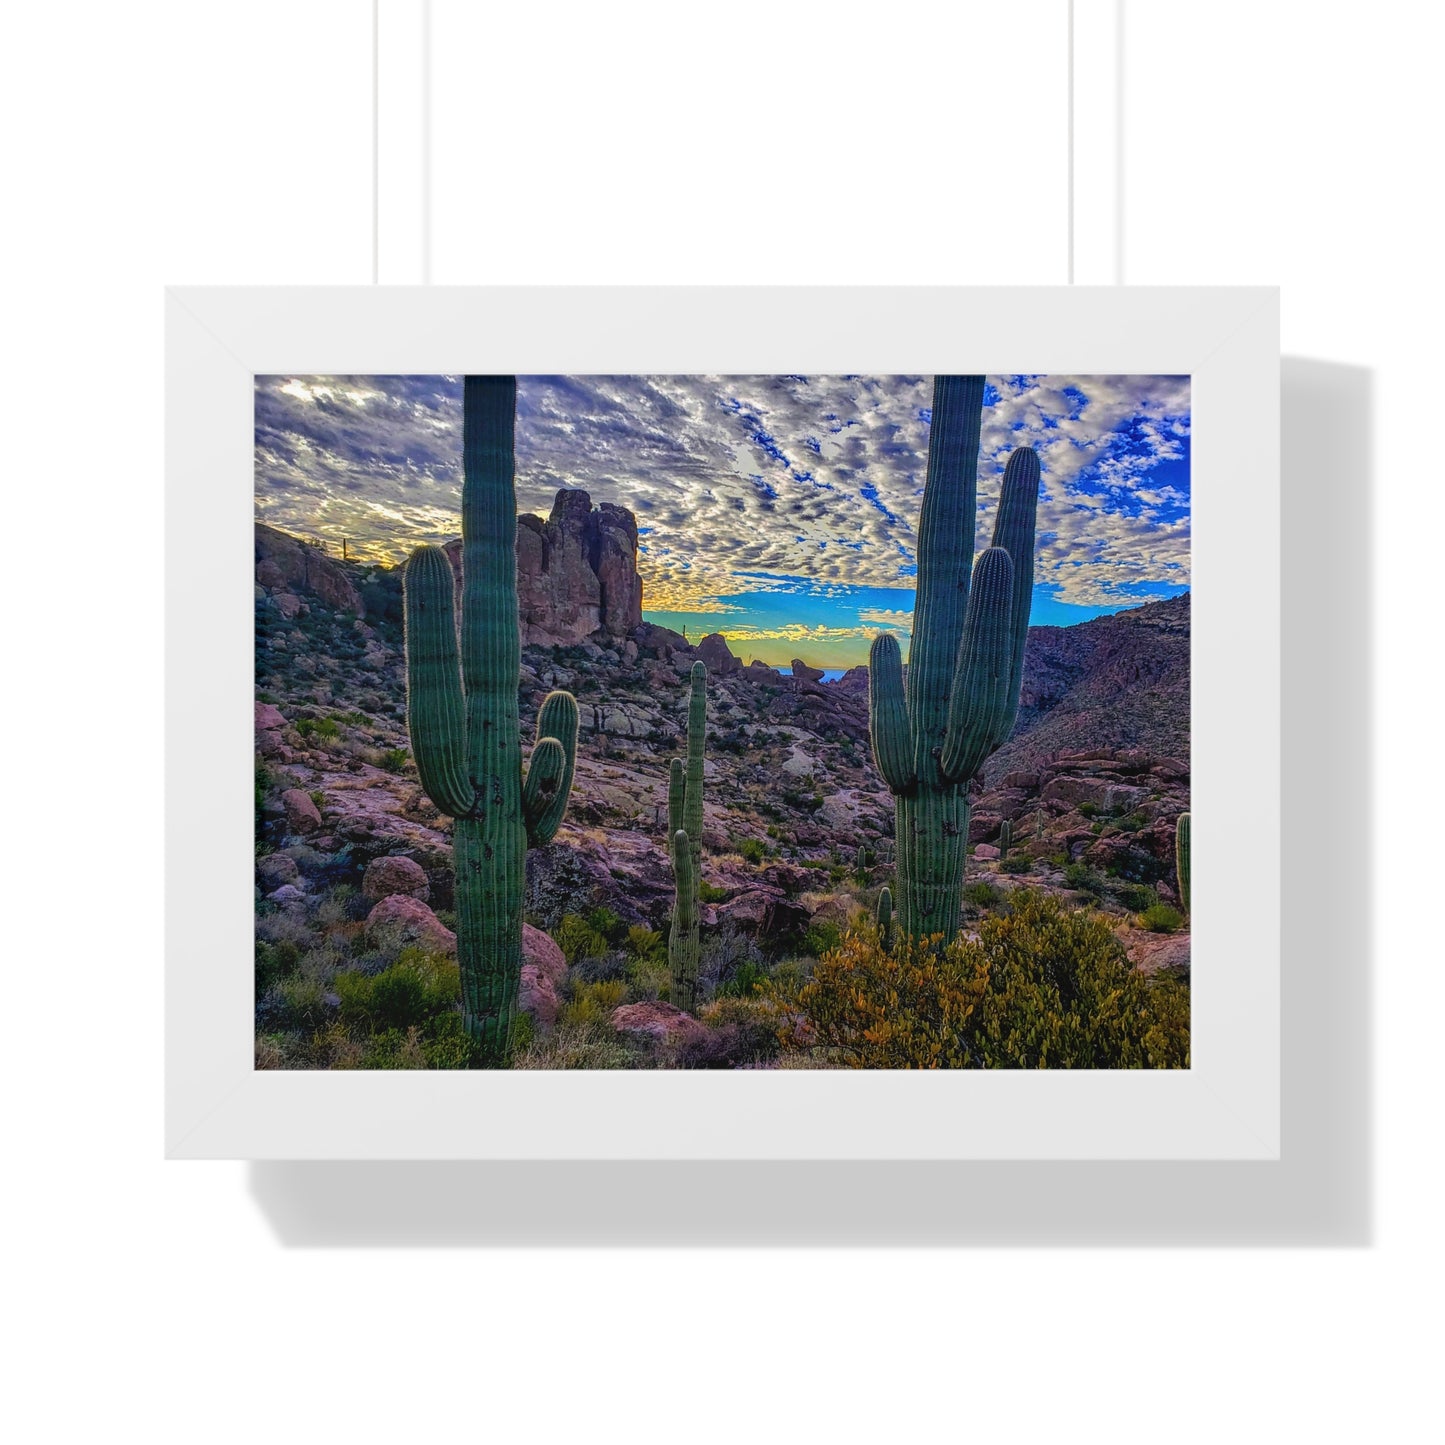 Framed Desert Photography: Mountaintop Saguaros; Arizona Photography, Wall Art, Natural Landscape Home Decor for Hikers and Nature Lovers!